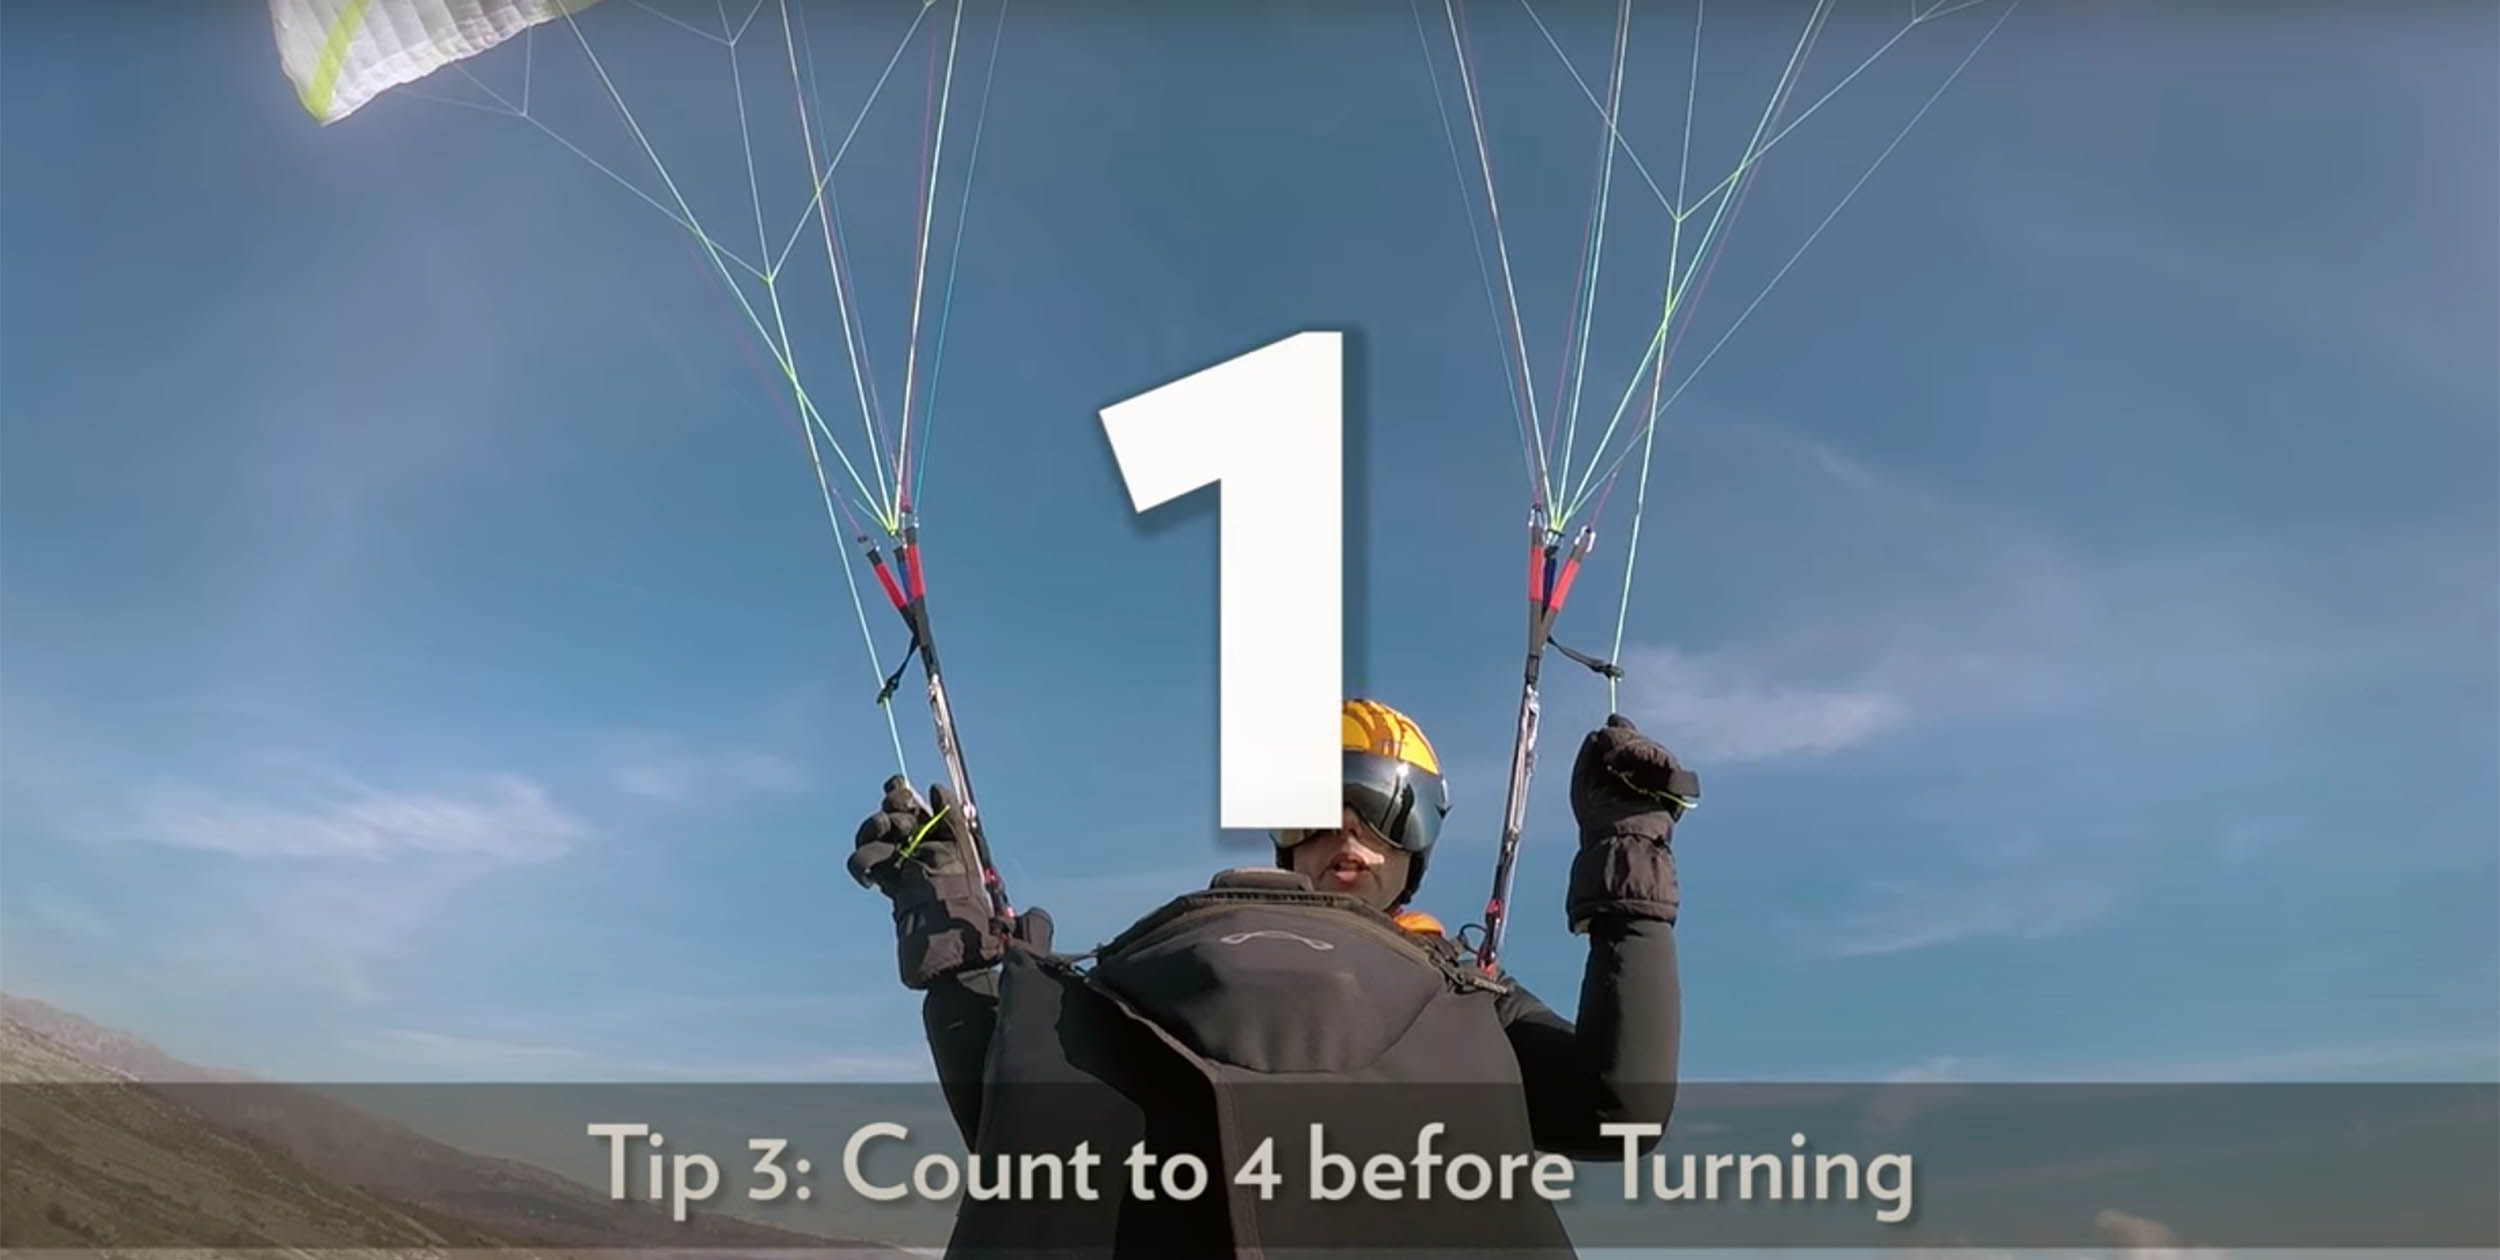 How to thermal a paraglider